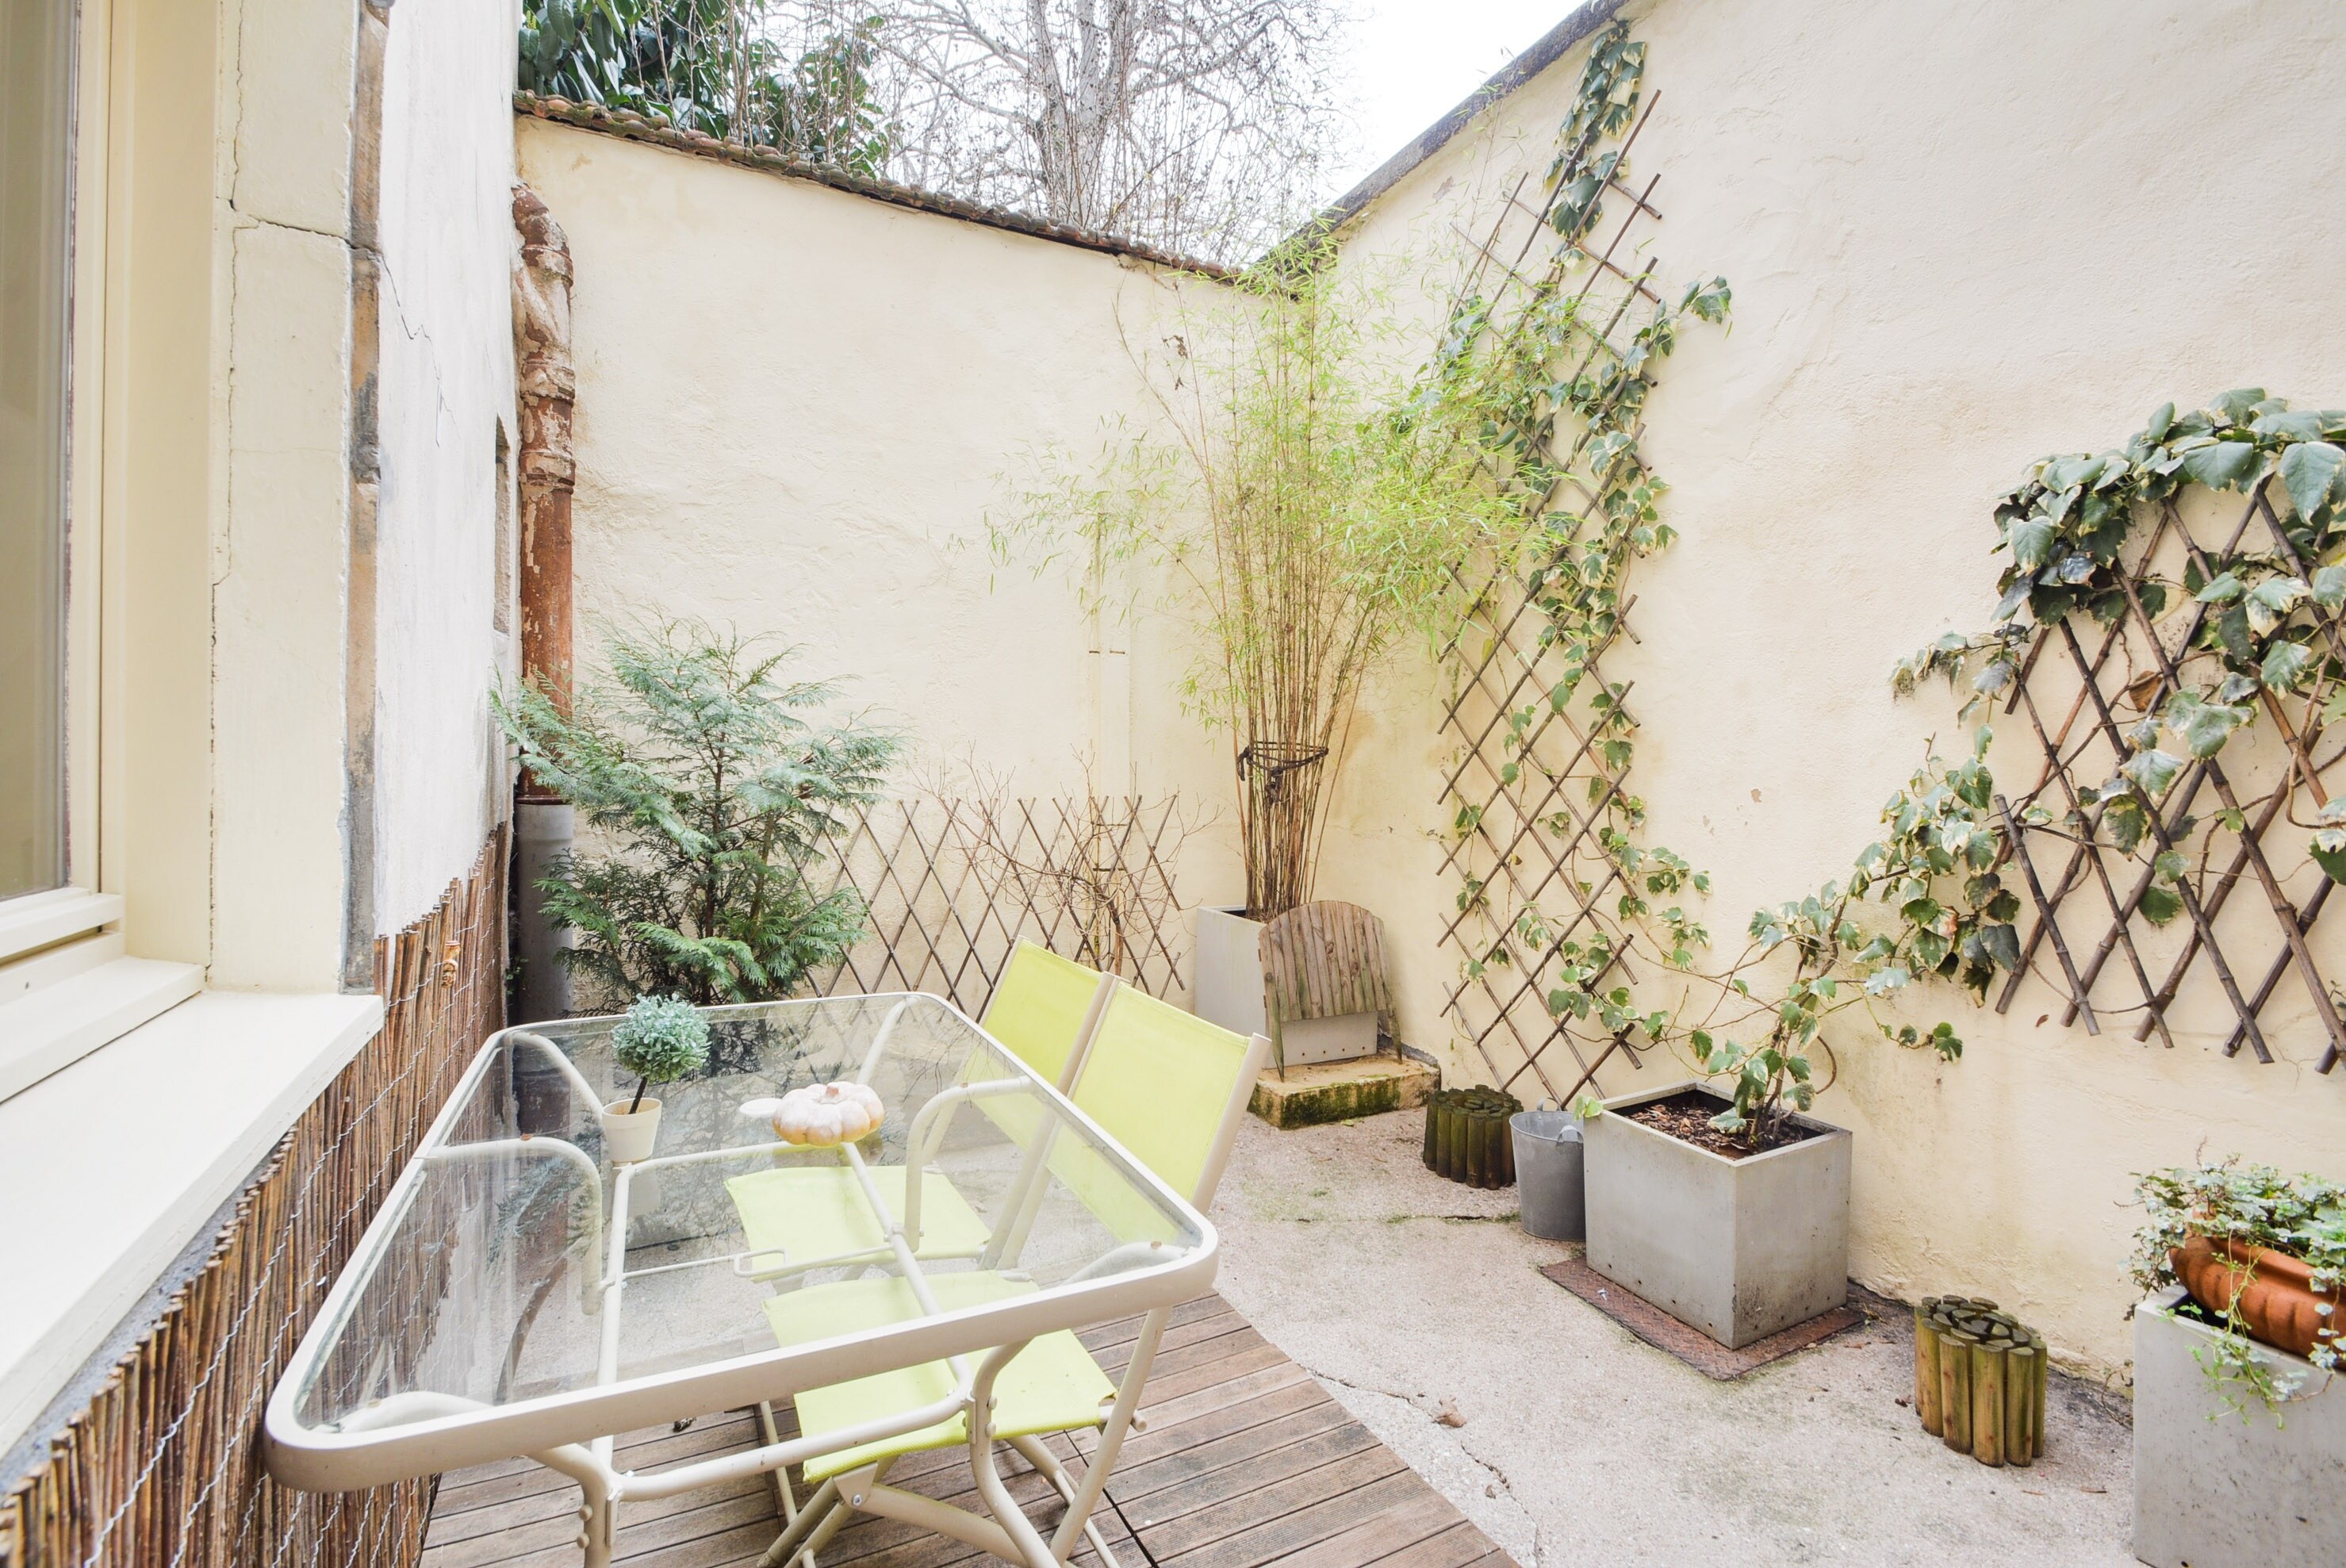 Property Image 2 - Elegant one bedroom flat with private patio close to Stanislas Square